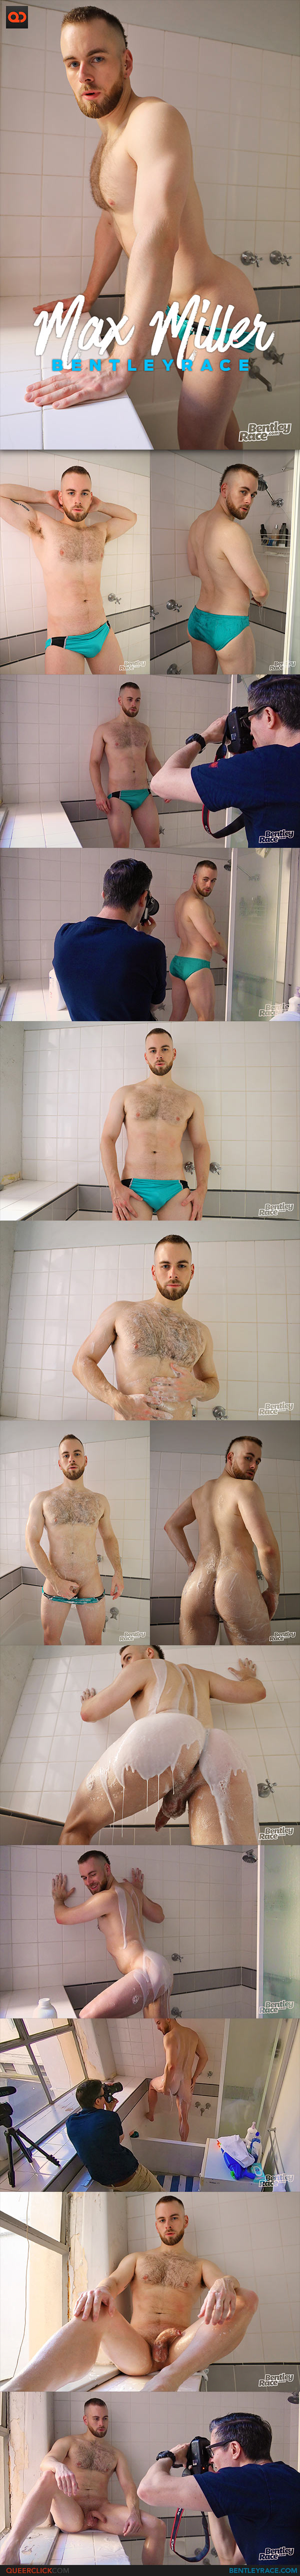 Bentley Race: Maxwell Miller - Soaping up in the Shower